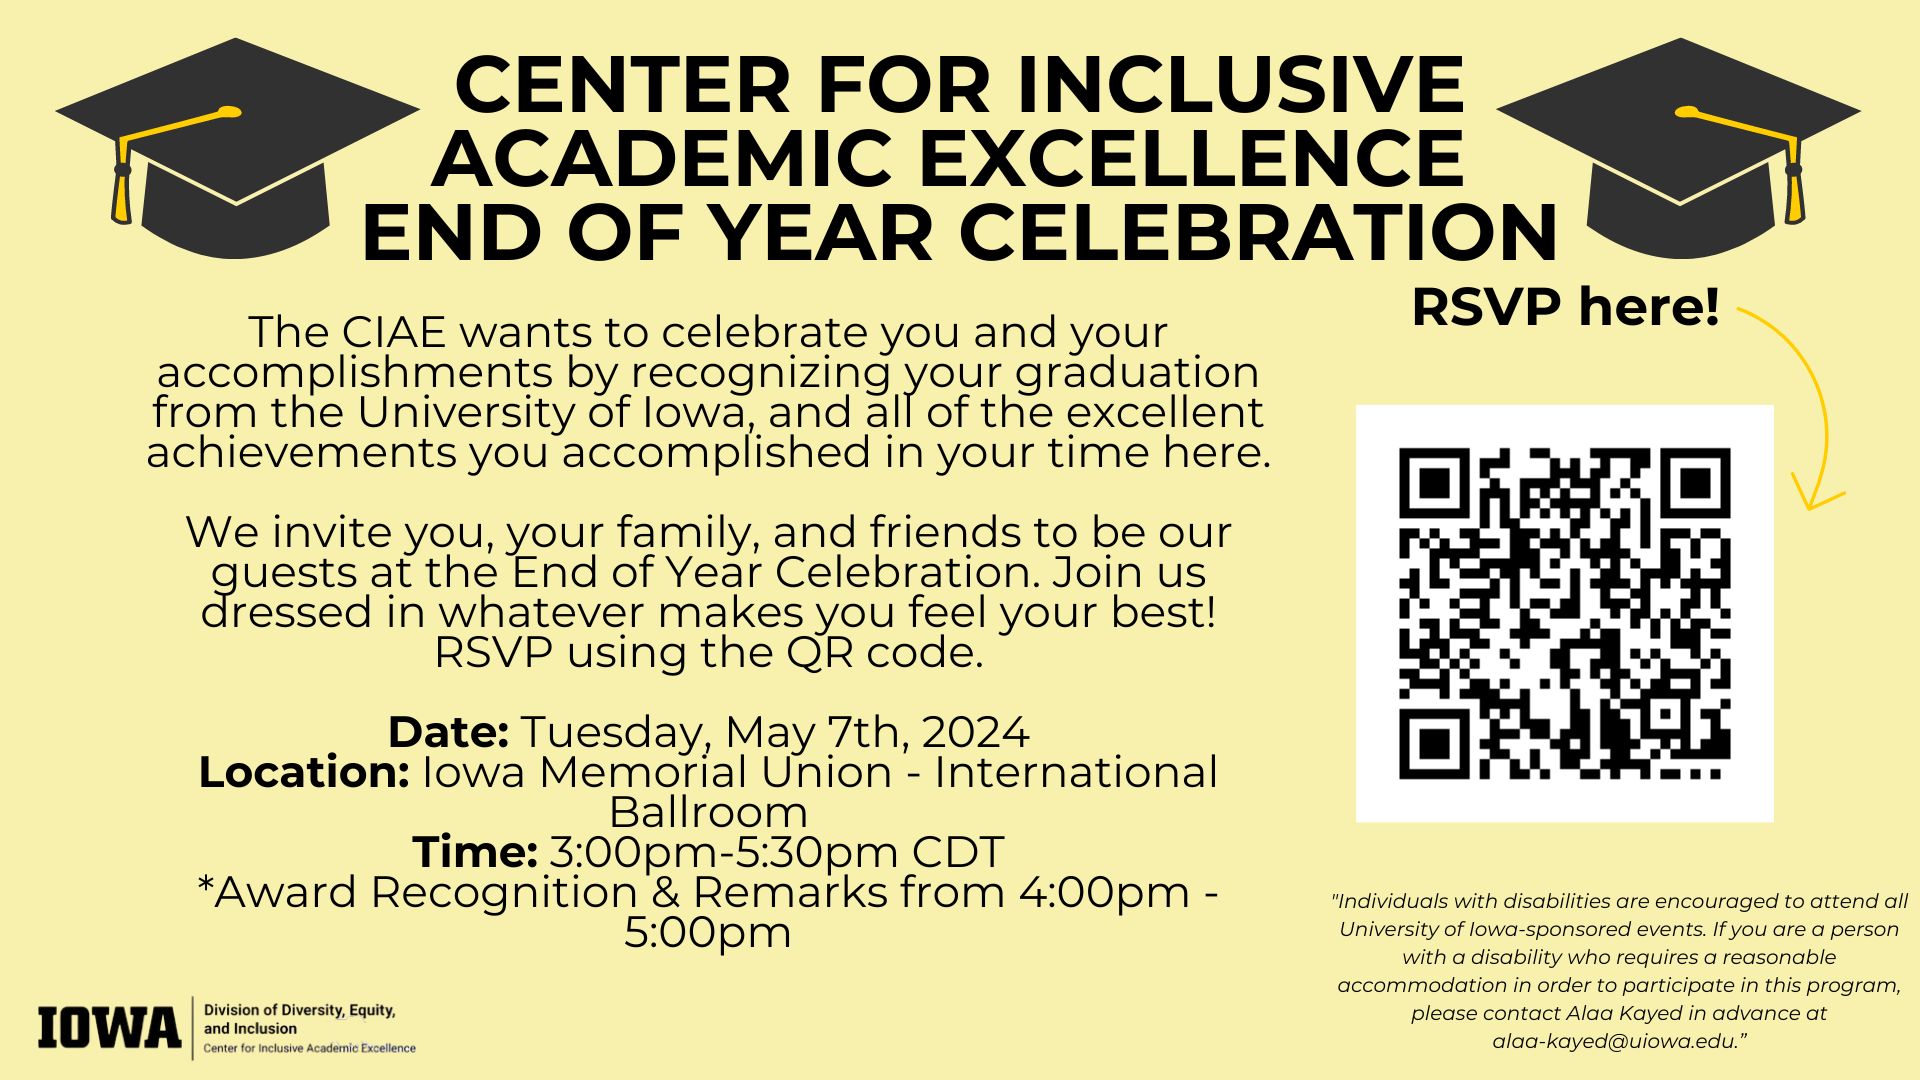 Center for Inclusive Academic Excellence End of Year Celebration. The CIAE wants to celebrate you and your accomplishments by recognizing your graduation from the university of Iowa and all of the excellent achievements you have accomplished in your time here. We invite you, your family, and friends to be our guests at the End of the Year Celebration. Join us dressed in whatever makes you feel comfortable. RSVP using the QR code. Tuesday, May 7, 2024, Iowa Memorial Union International Ballroom, 3:00-5:00pm CDT, award recognition and remarks from 4:00-5:00pm